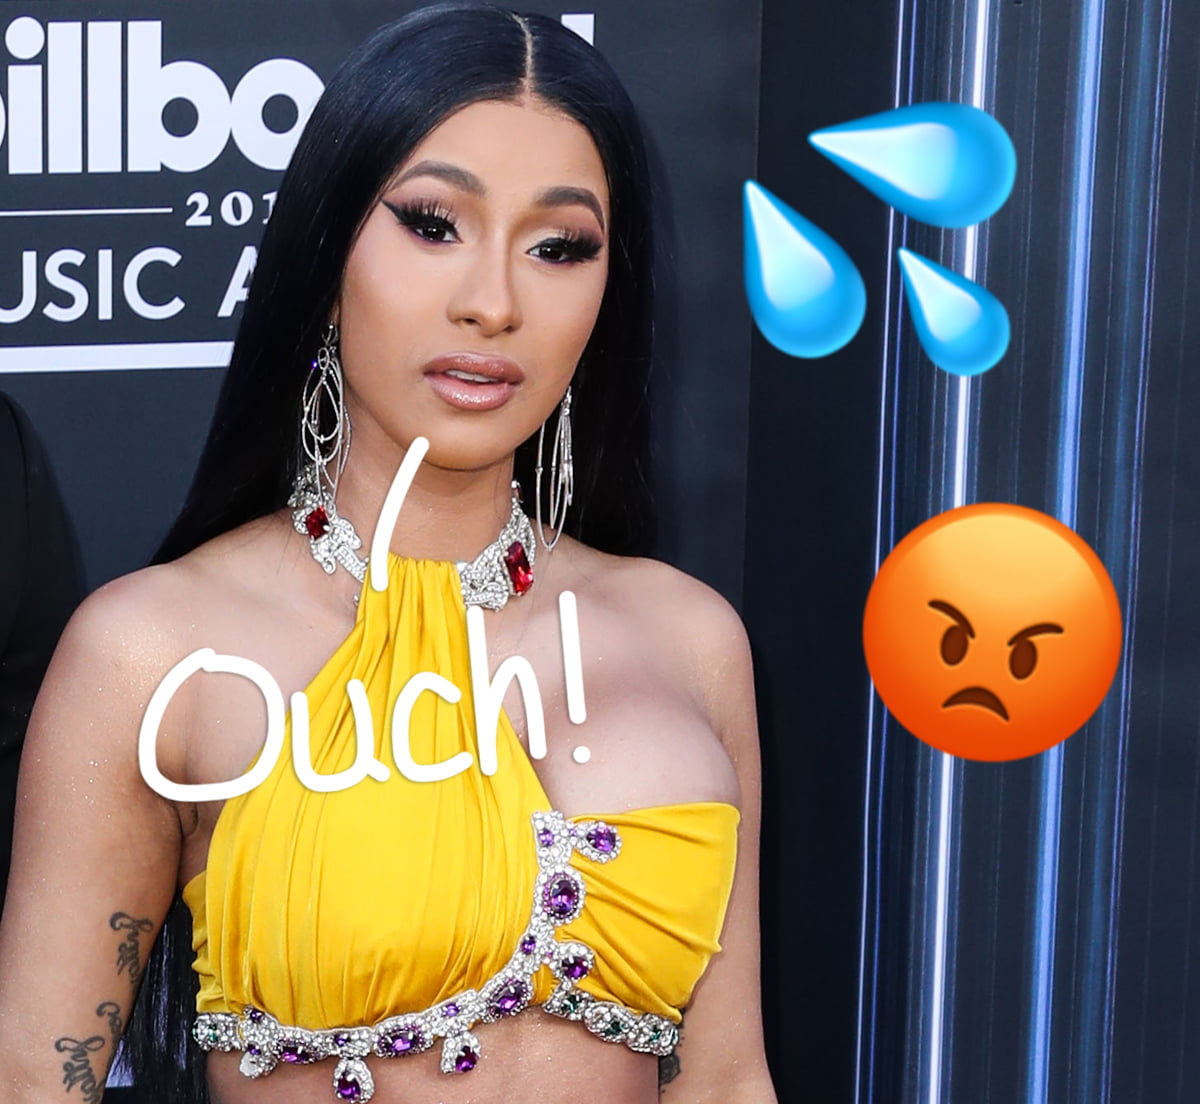 Cardi B Speaks Out About Water Throwing Incident: 'A Bitch Got Motherf**king Assaulted'